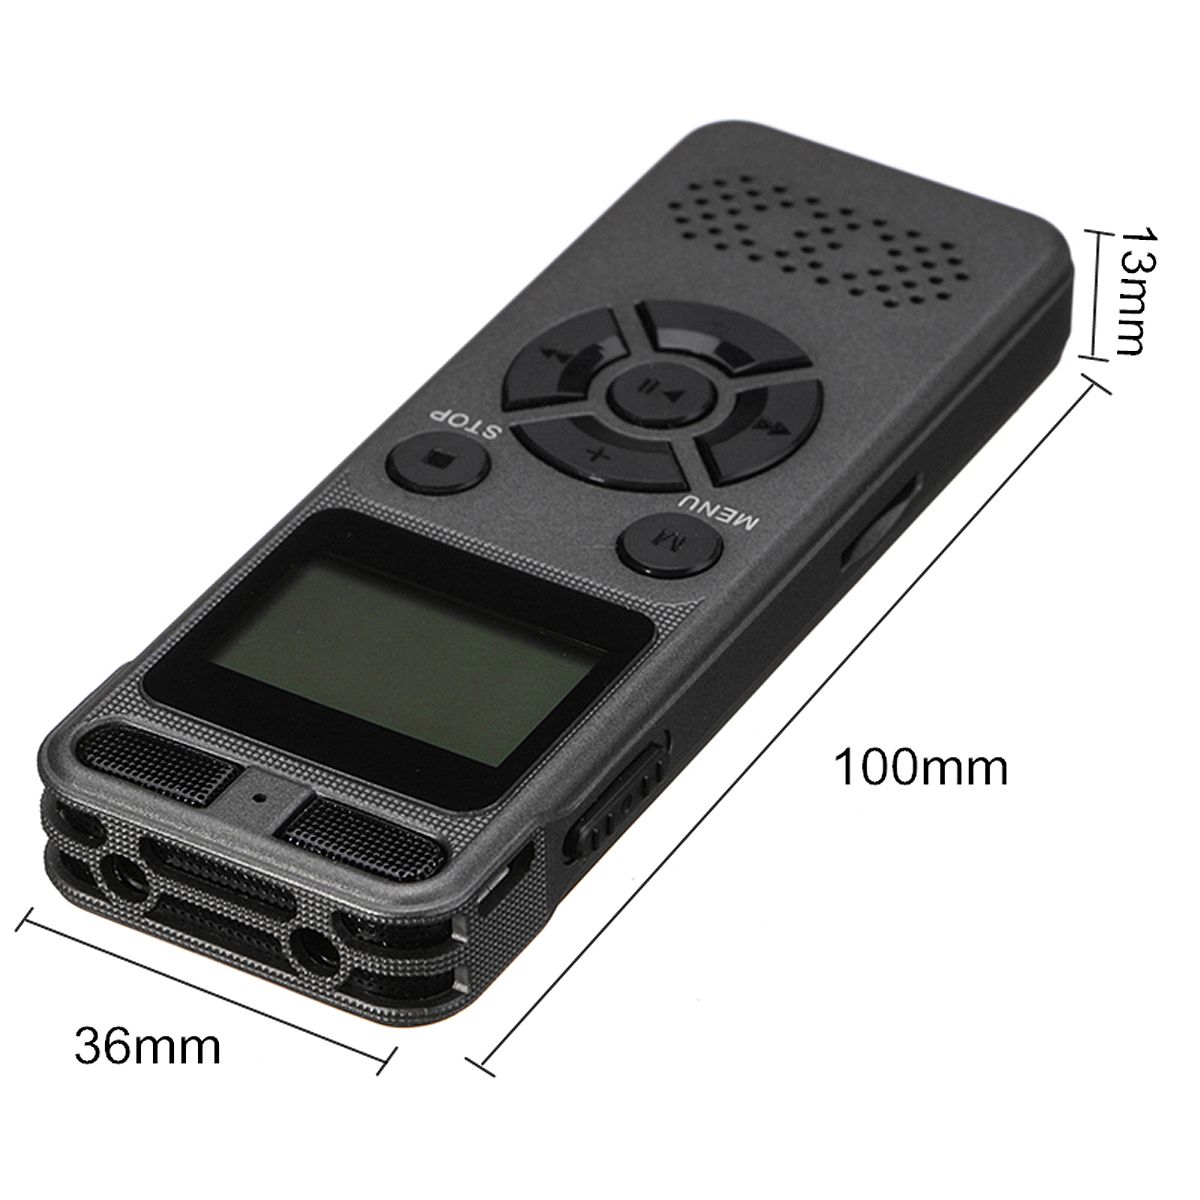 8GB-Rechargeable-LCD-Digital-Audio-Sound-A-to-B-Repeat-Voice-Recorder-Dictaphone-1263942